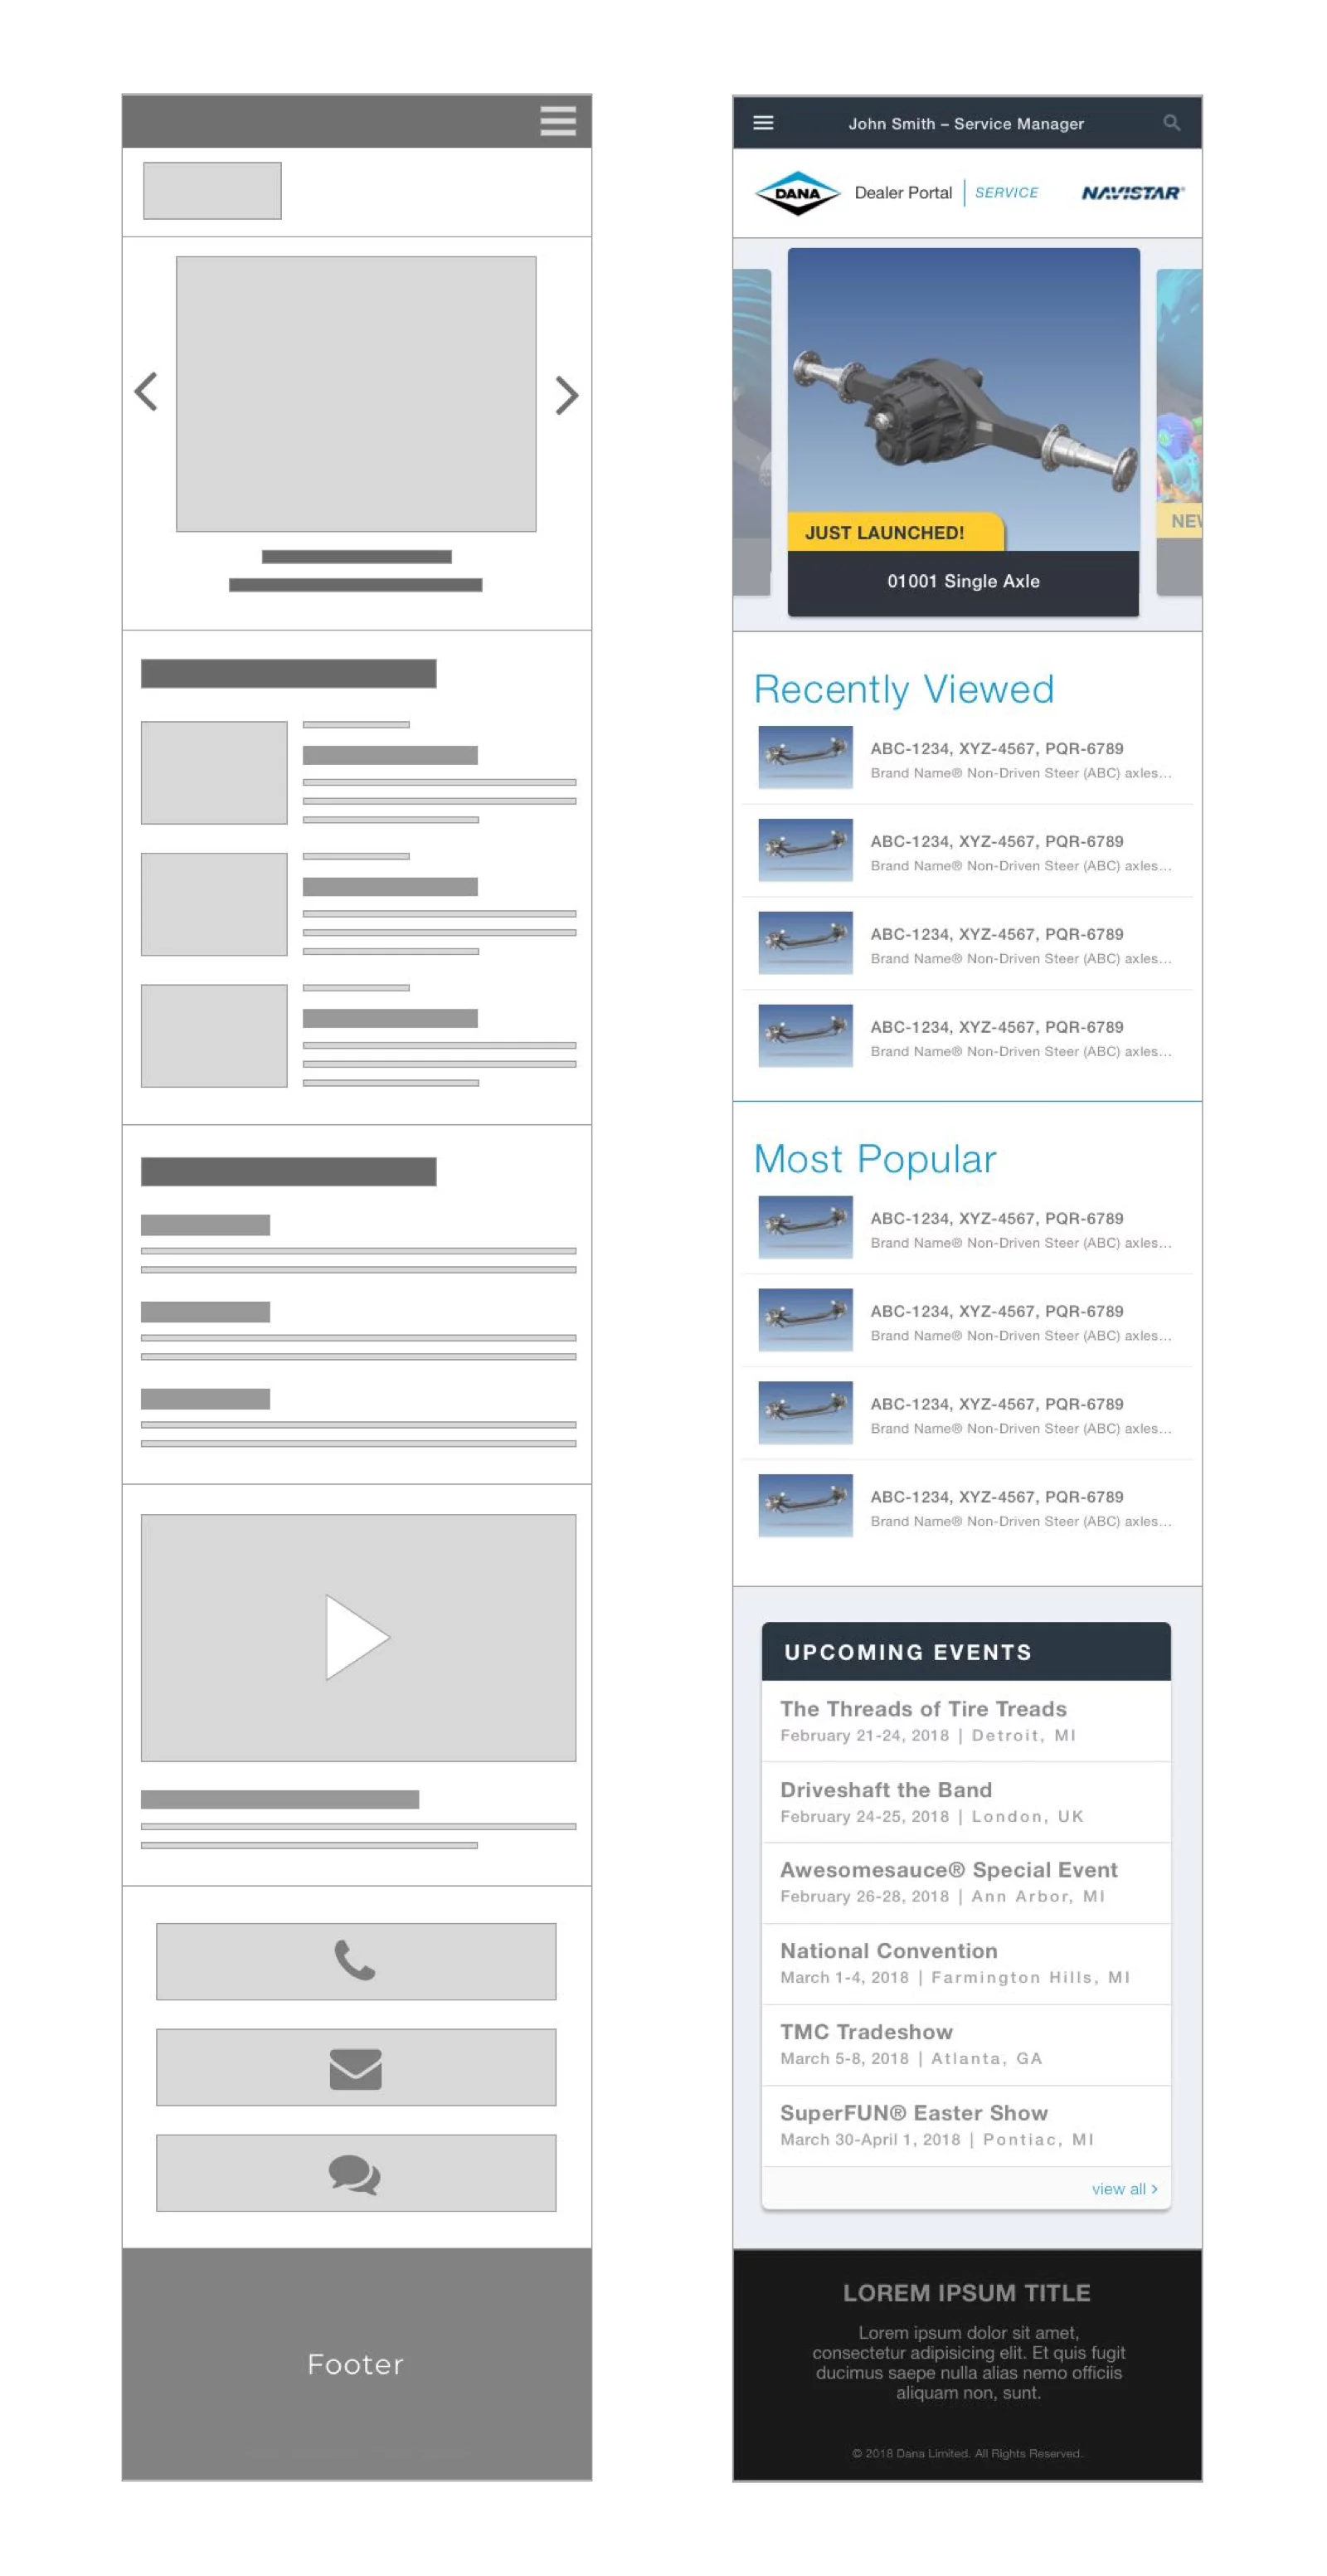 Wireframe - Dana Incorporated Service Manager Dashboard Page - Mobile Views (Full Size)